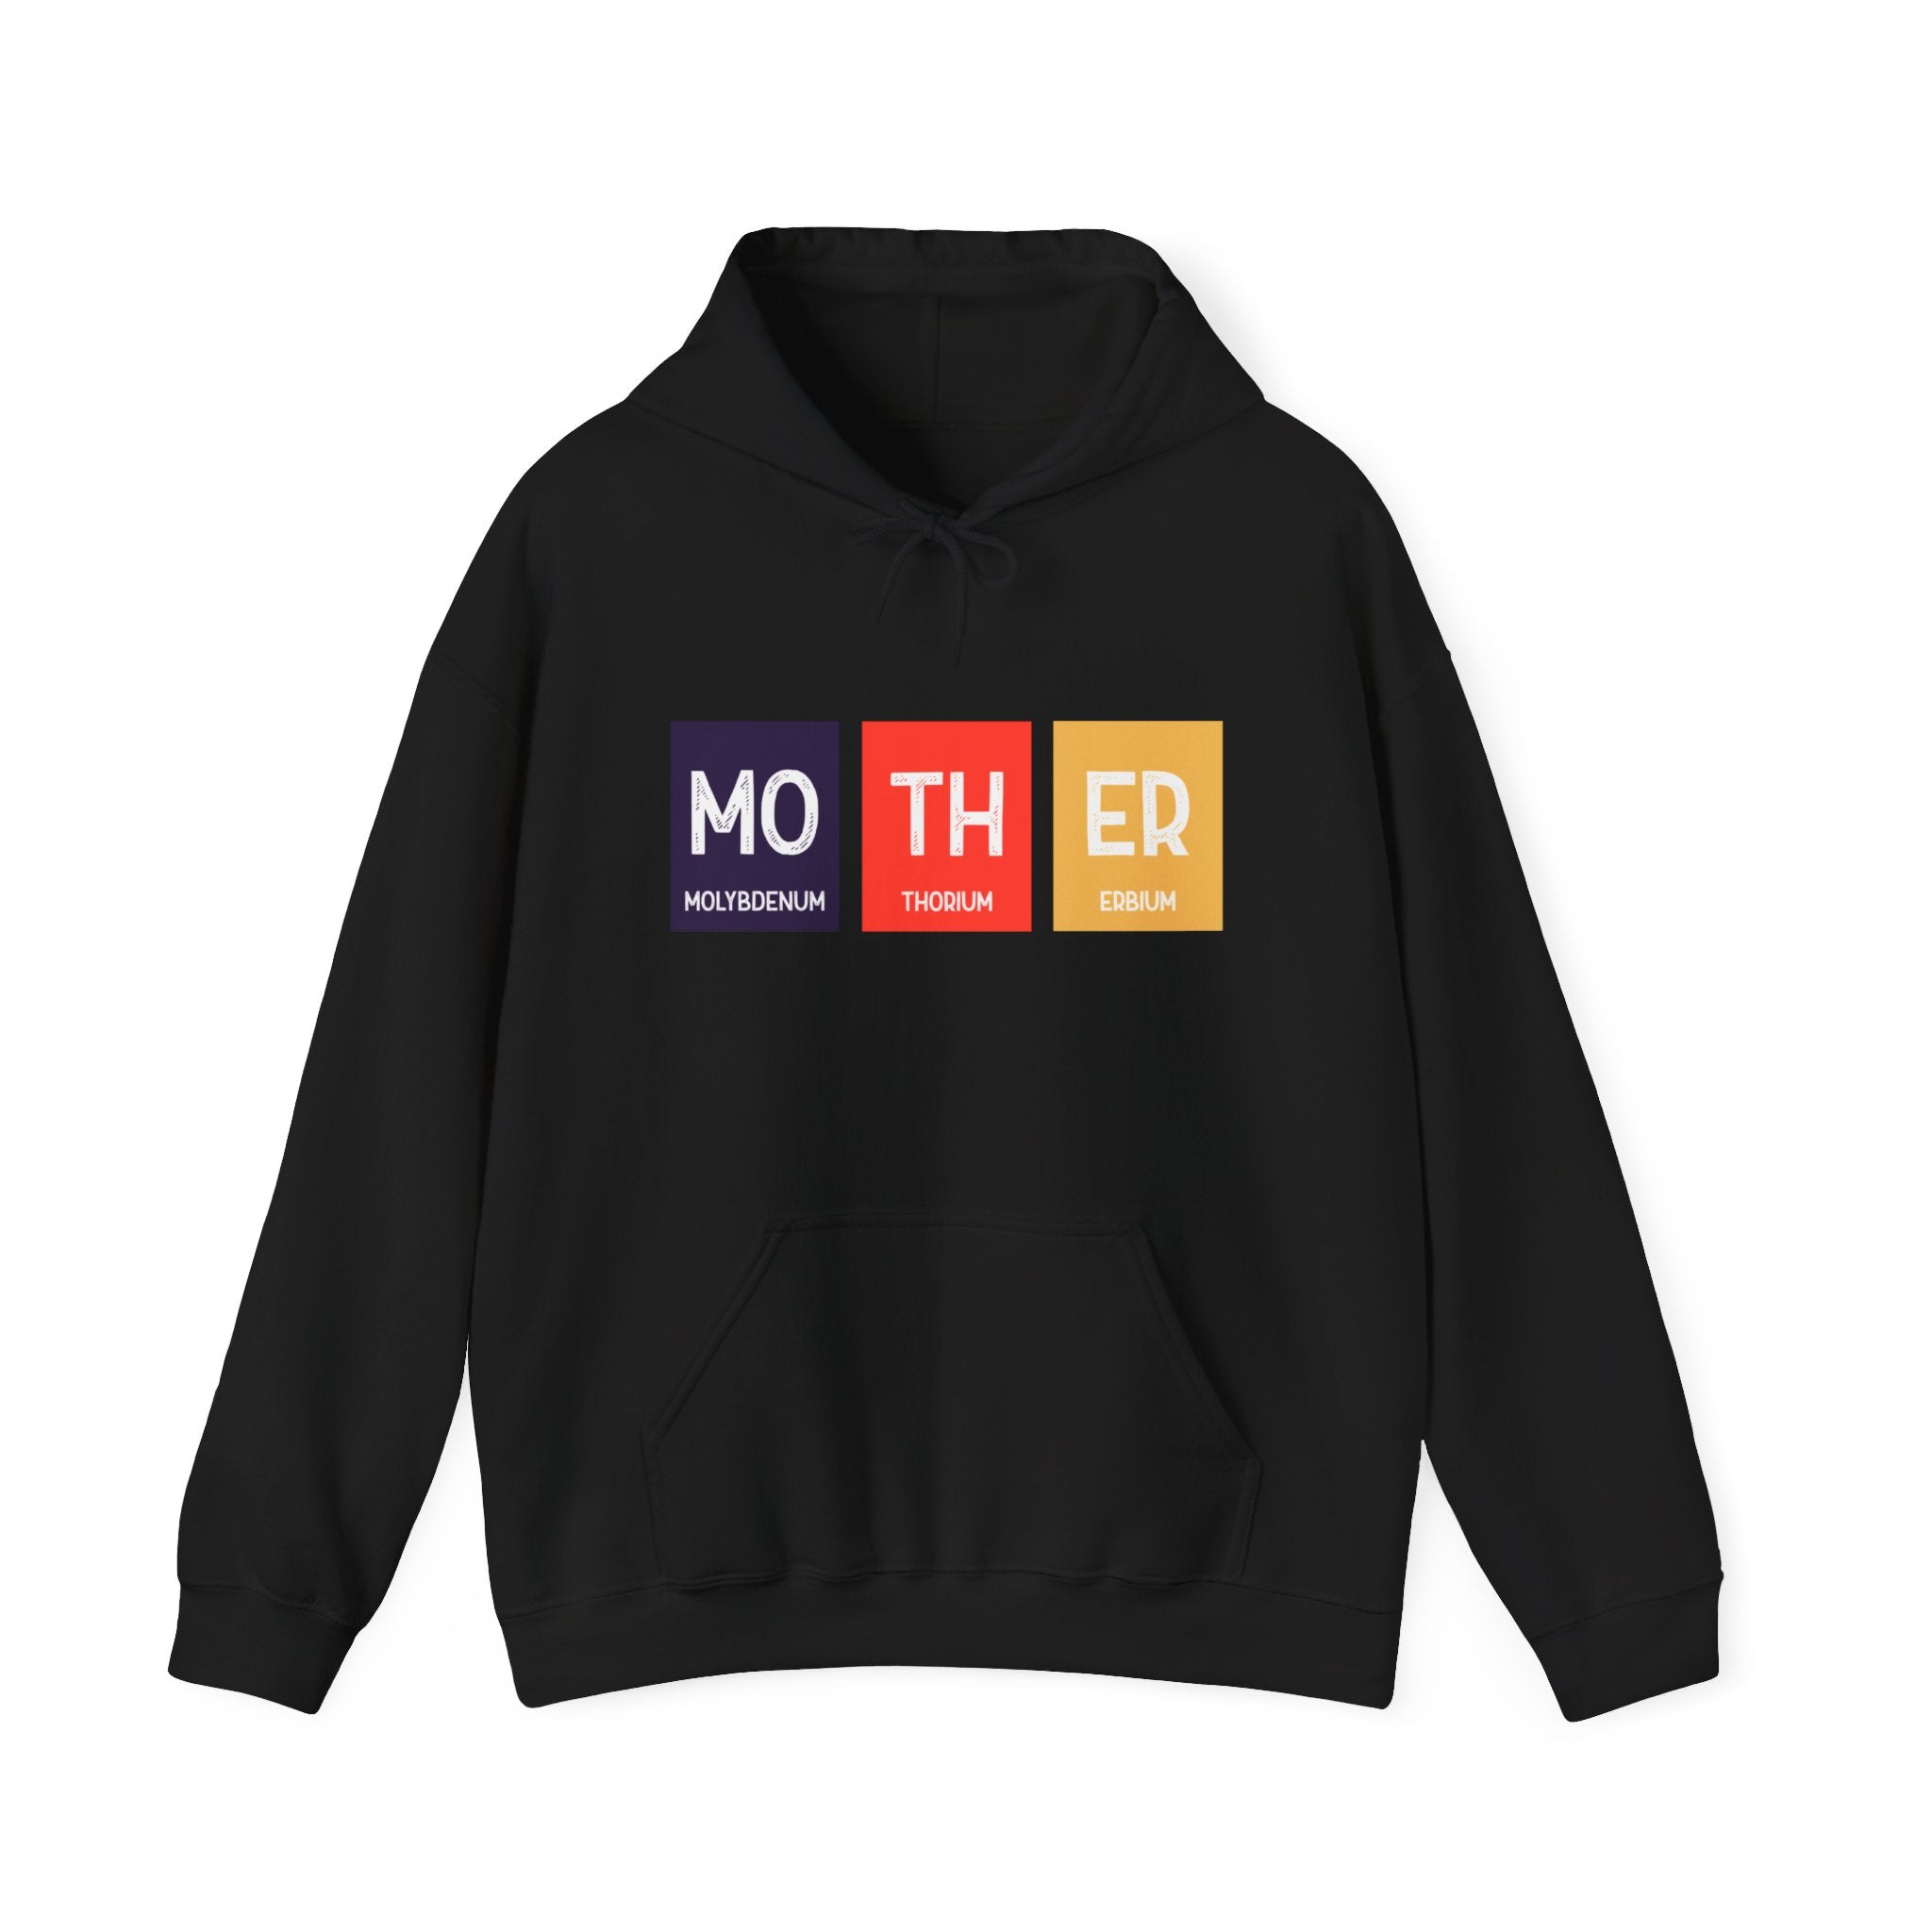 Mo-TH-ER - Hooded Sweatshirt showcasing a unique Mo-TH-ER design, with the word "MOTHER" cleverly spelled using periodic table elements for molybdenum, thorium, and erbium on the front, offering a relaxed style.